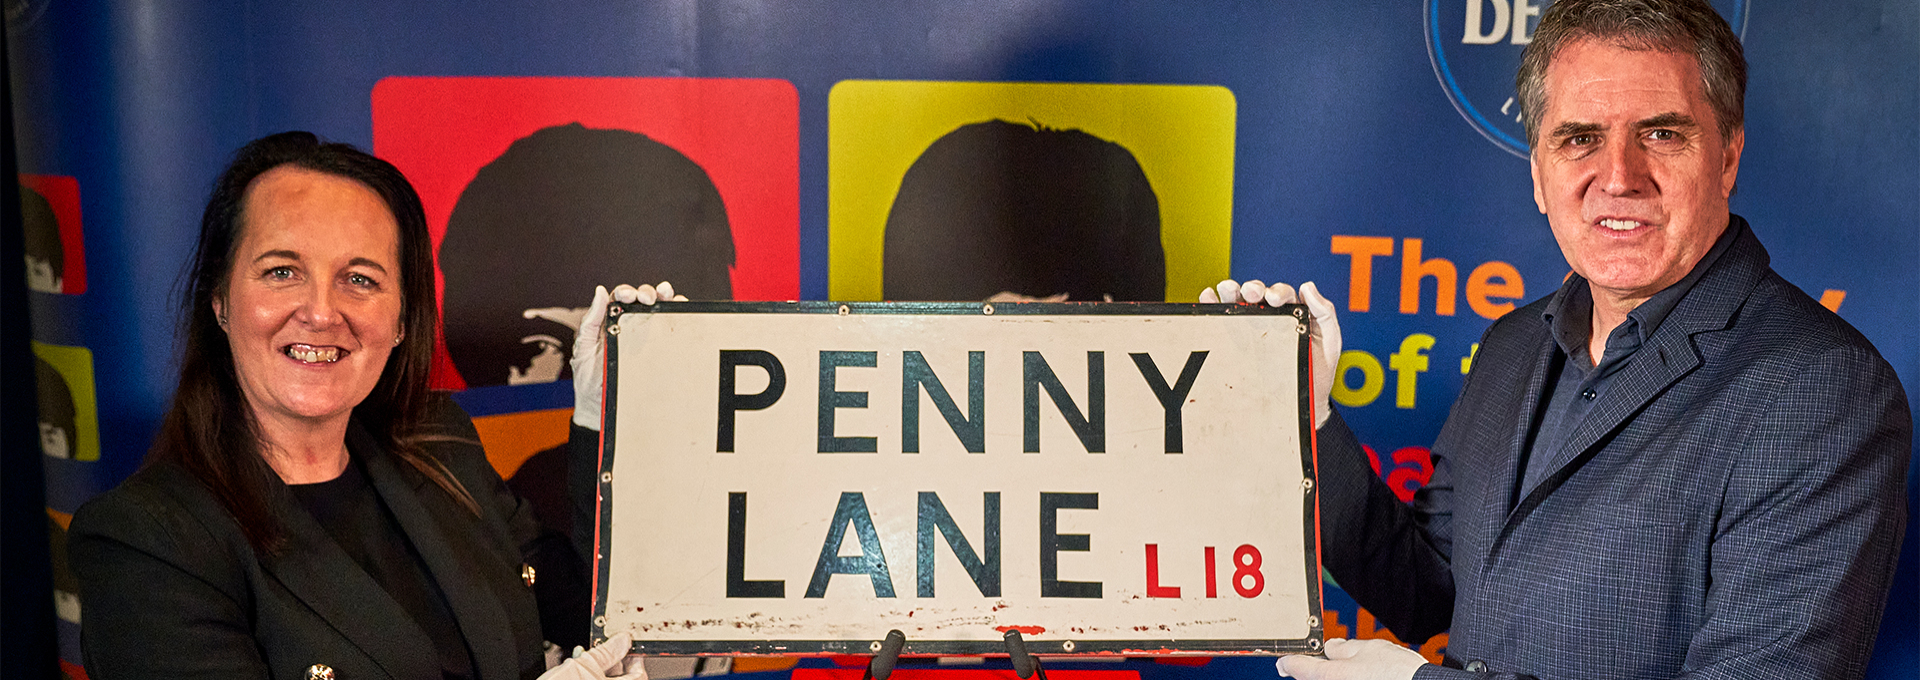 Penny Lane sign goes on display at The Beatles Story Museum Liverpool